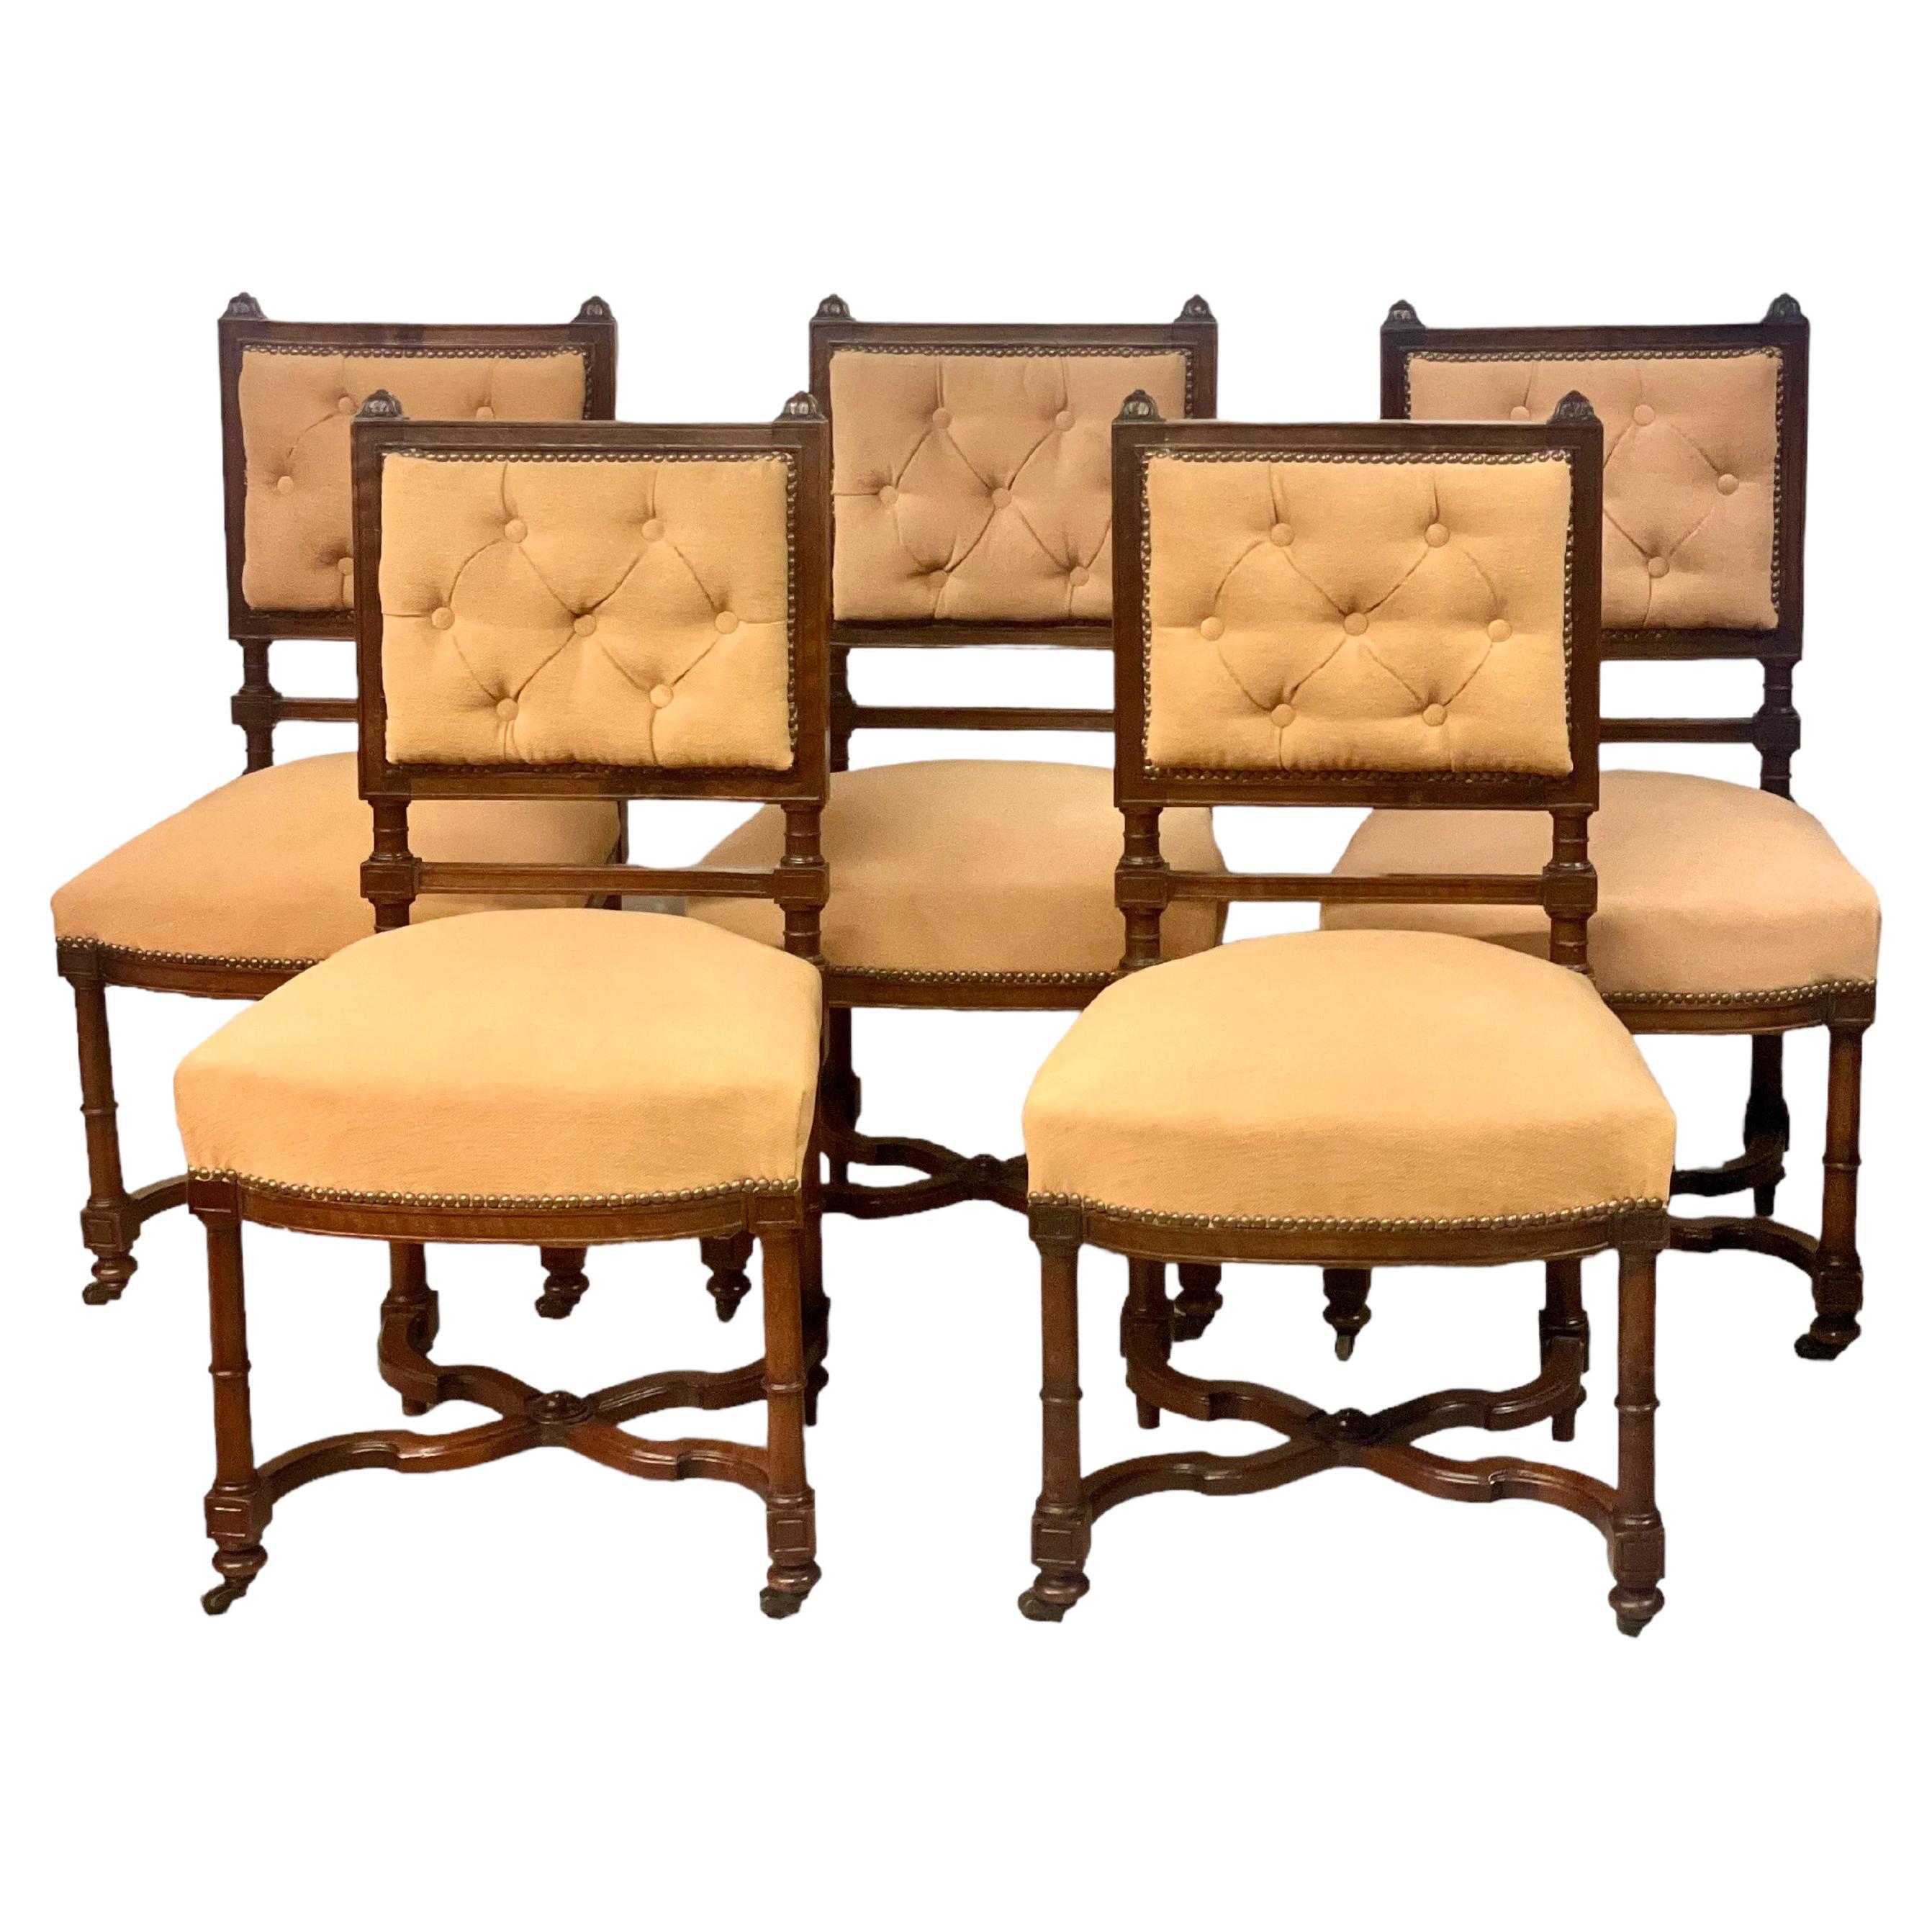 Set of Five Upholstered Louis XIII style Dining Chairs, 19th Century